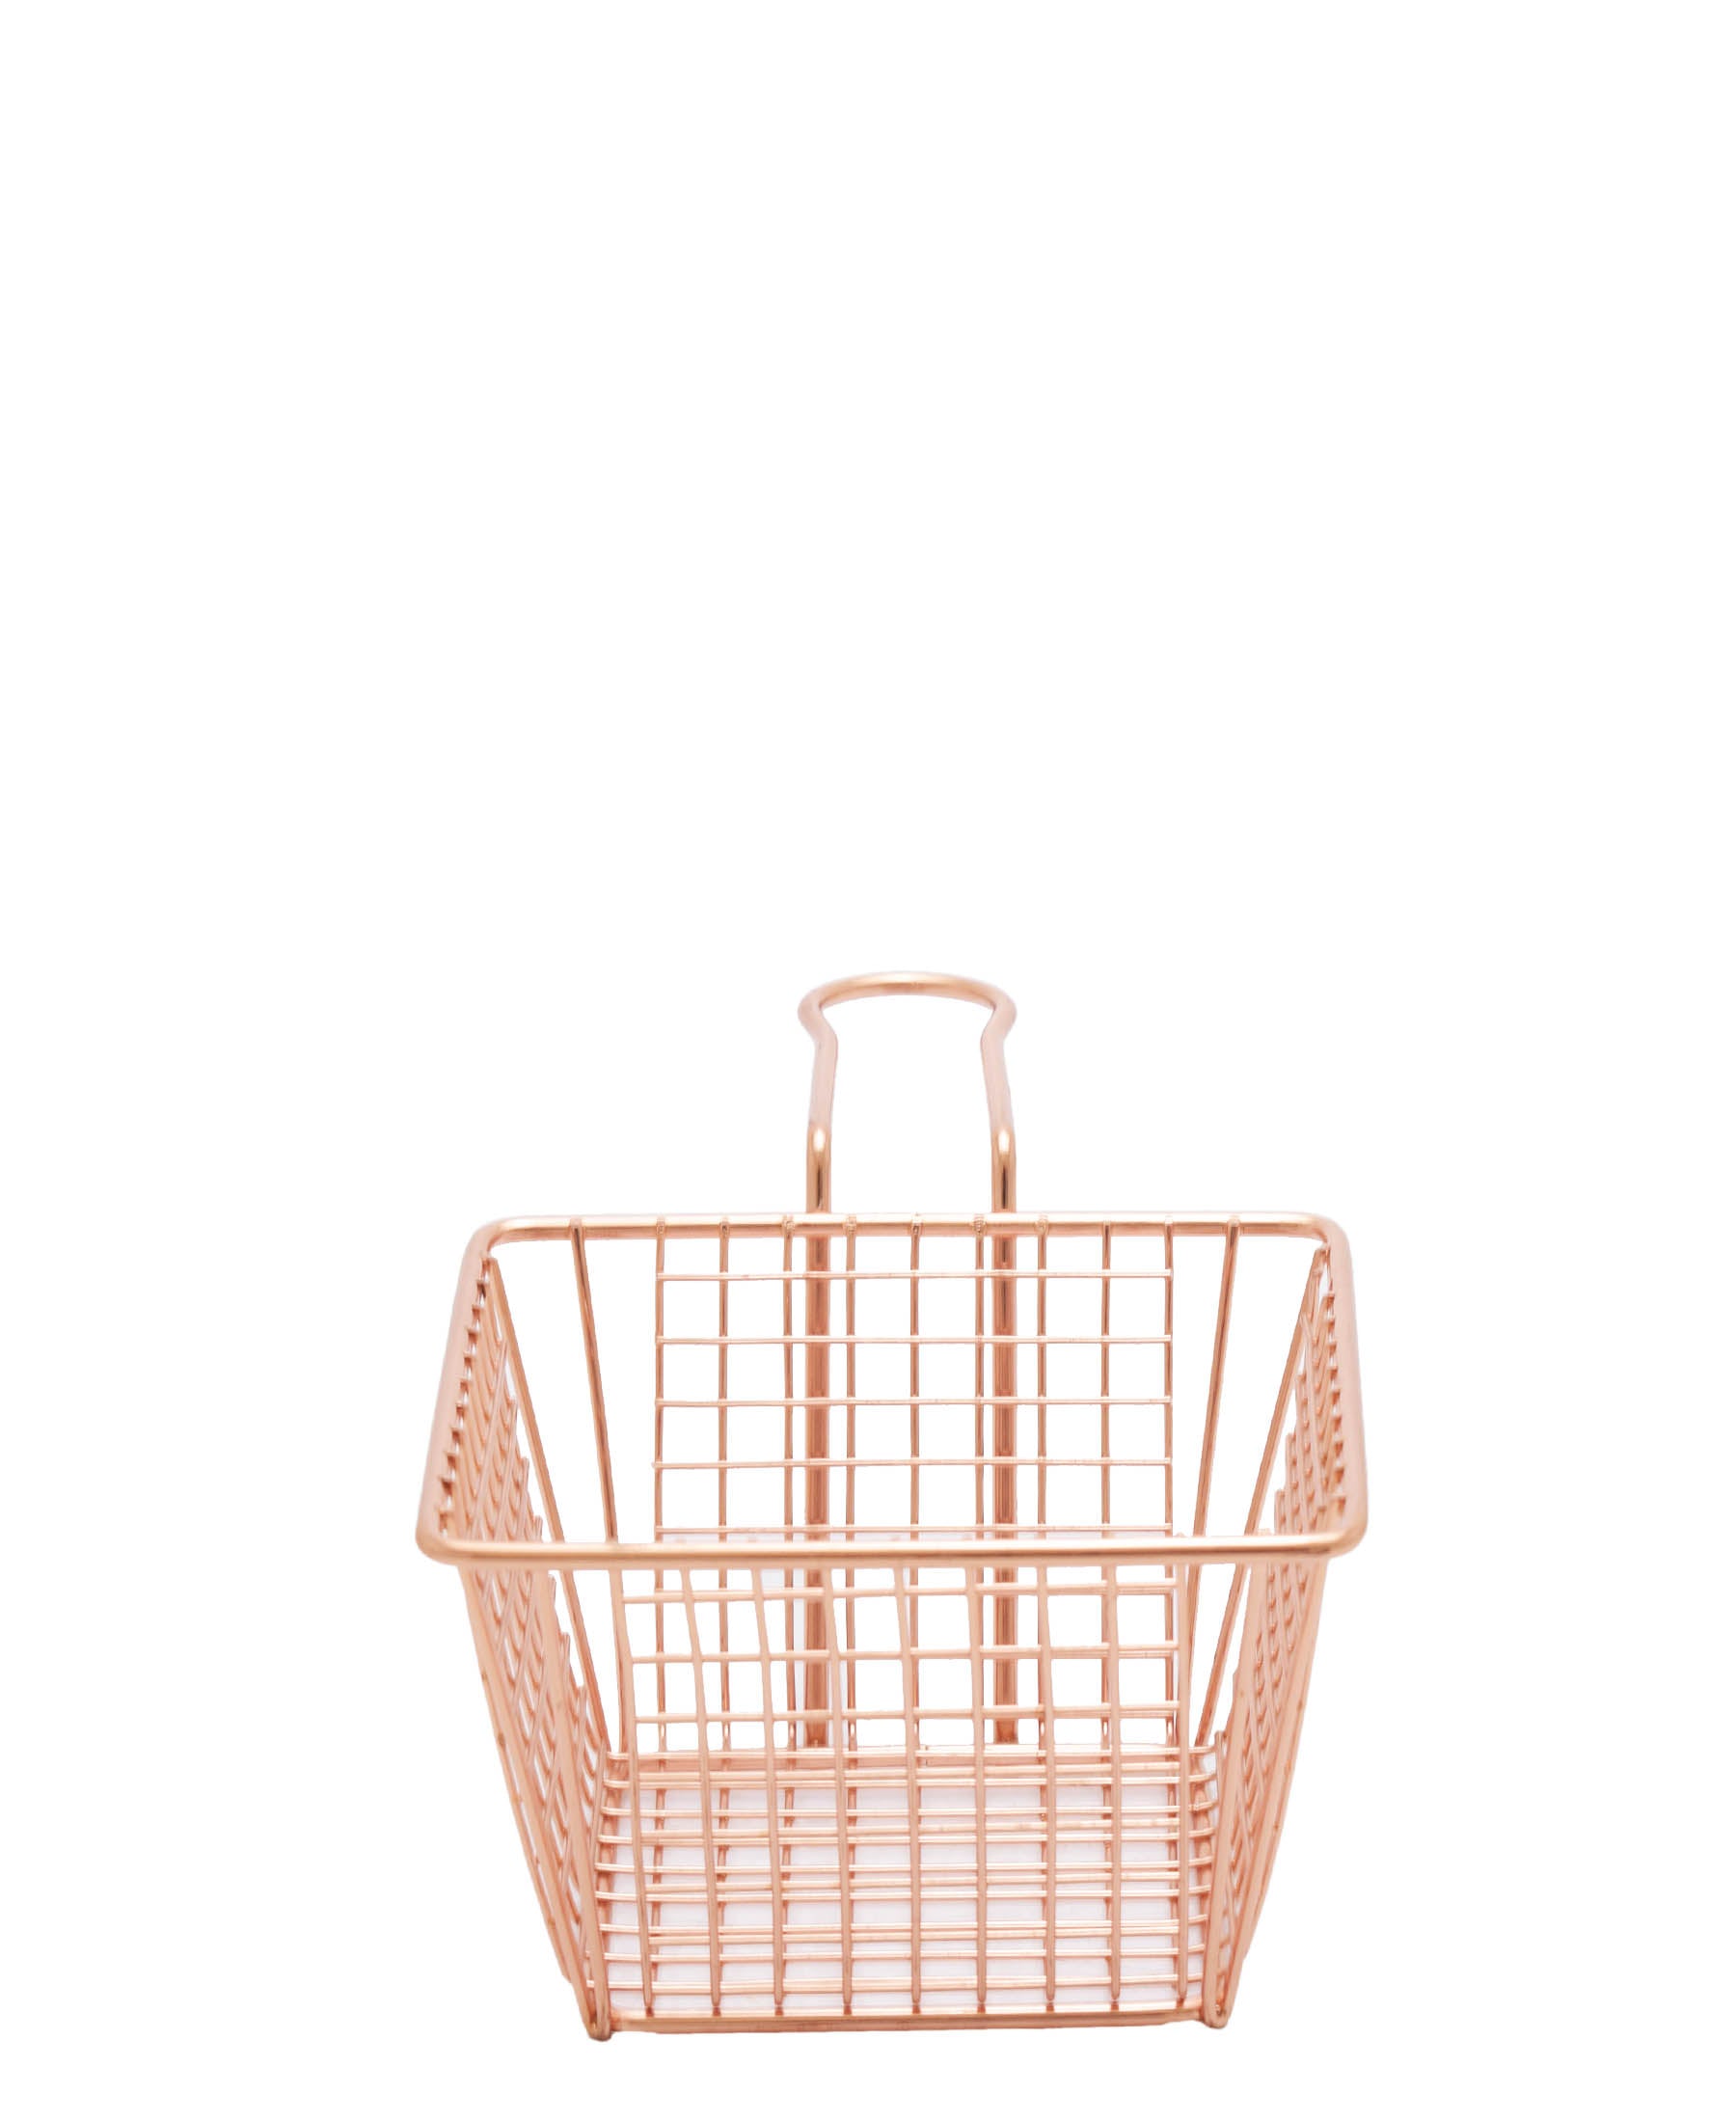 Kitchen Life Chip Basket With Handle - Copper